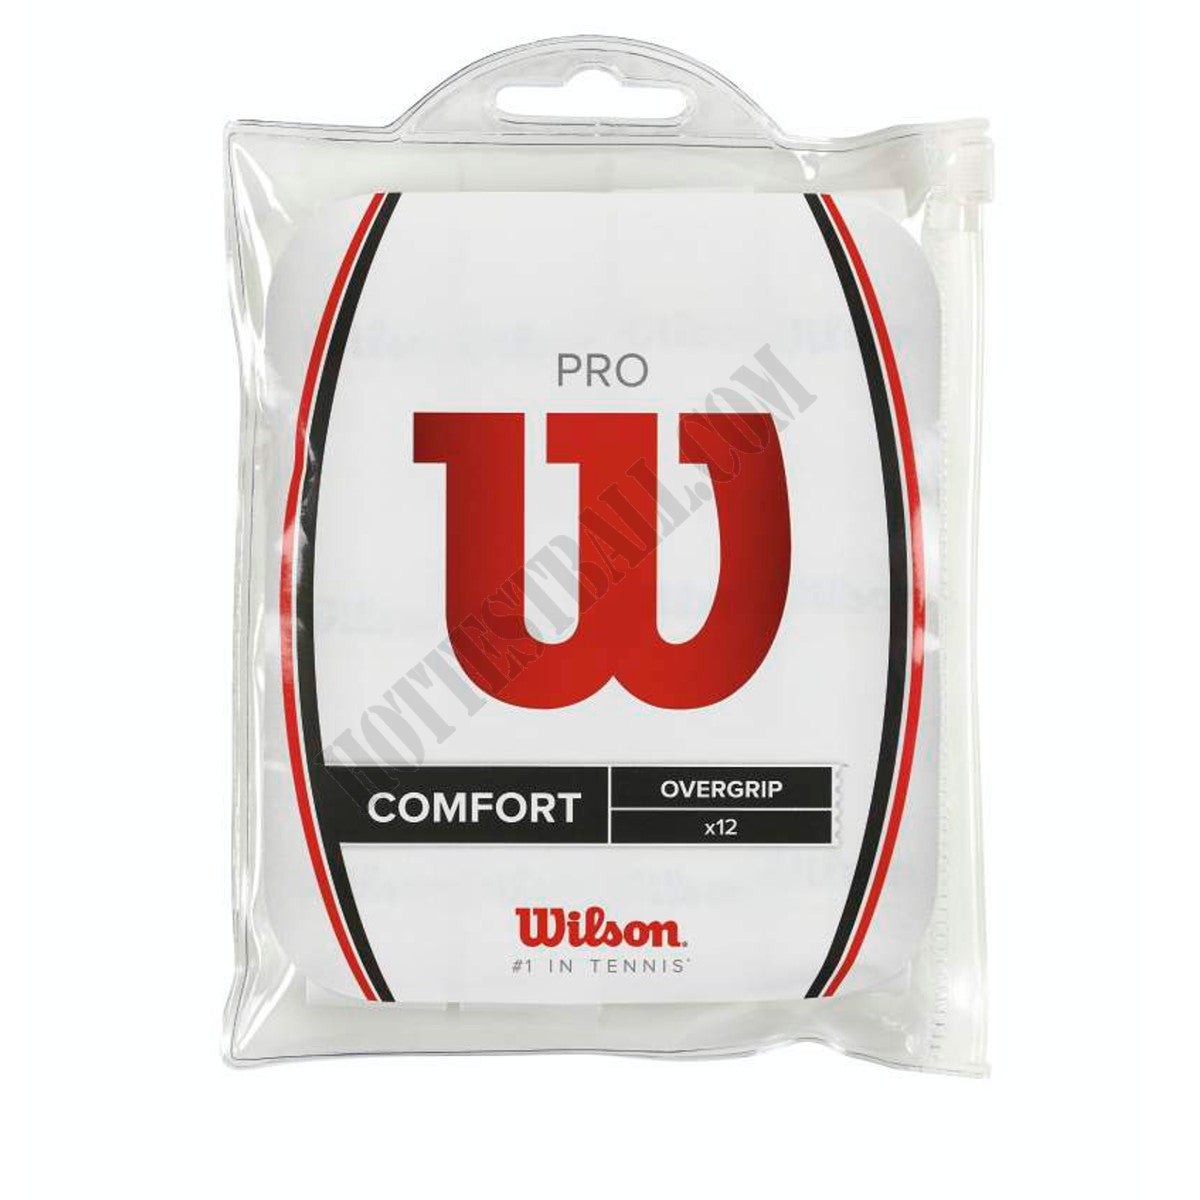 Pro Overgrip White - 12 Pack - Wilson Discount Store - Pro Overgrip White - 12 Pack - Wilson Discount Store